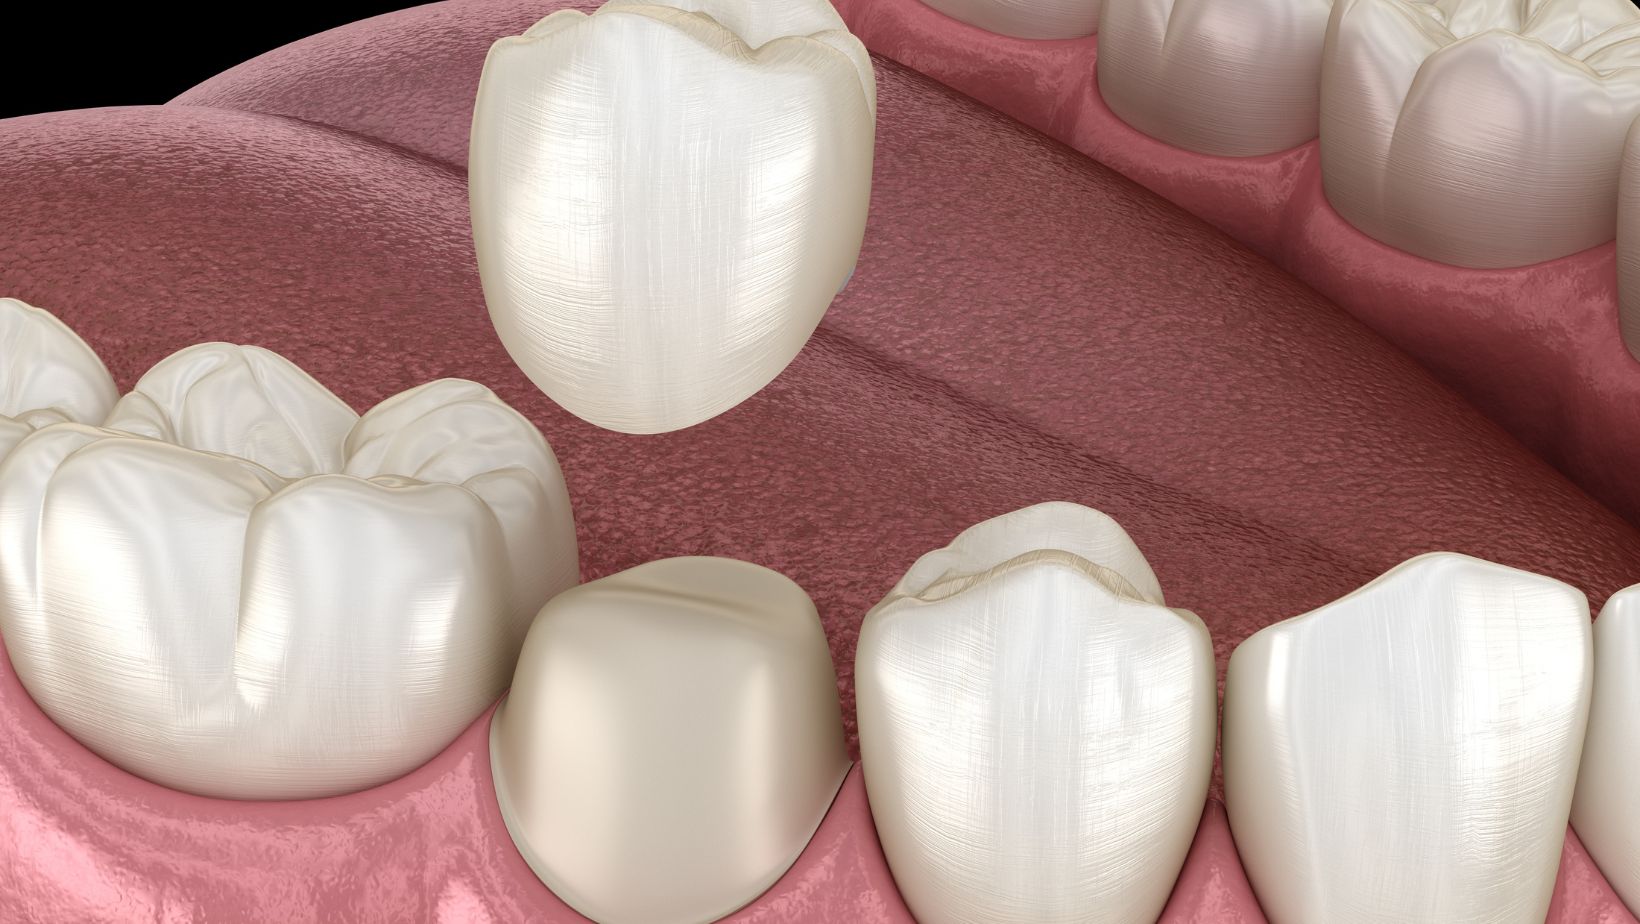 Decay Under Crowns: What to Watch For and How to Fix It